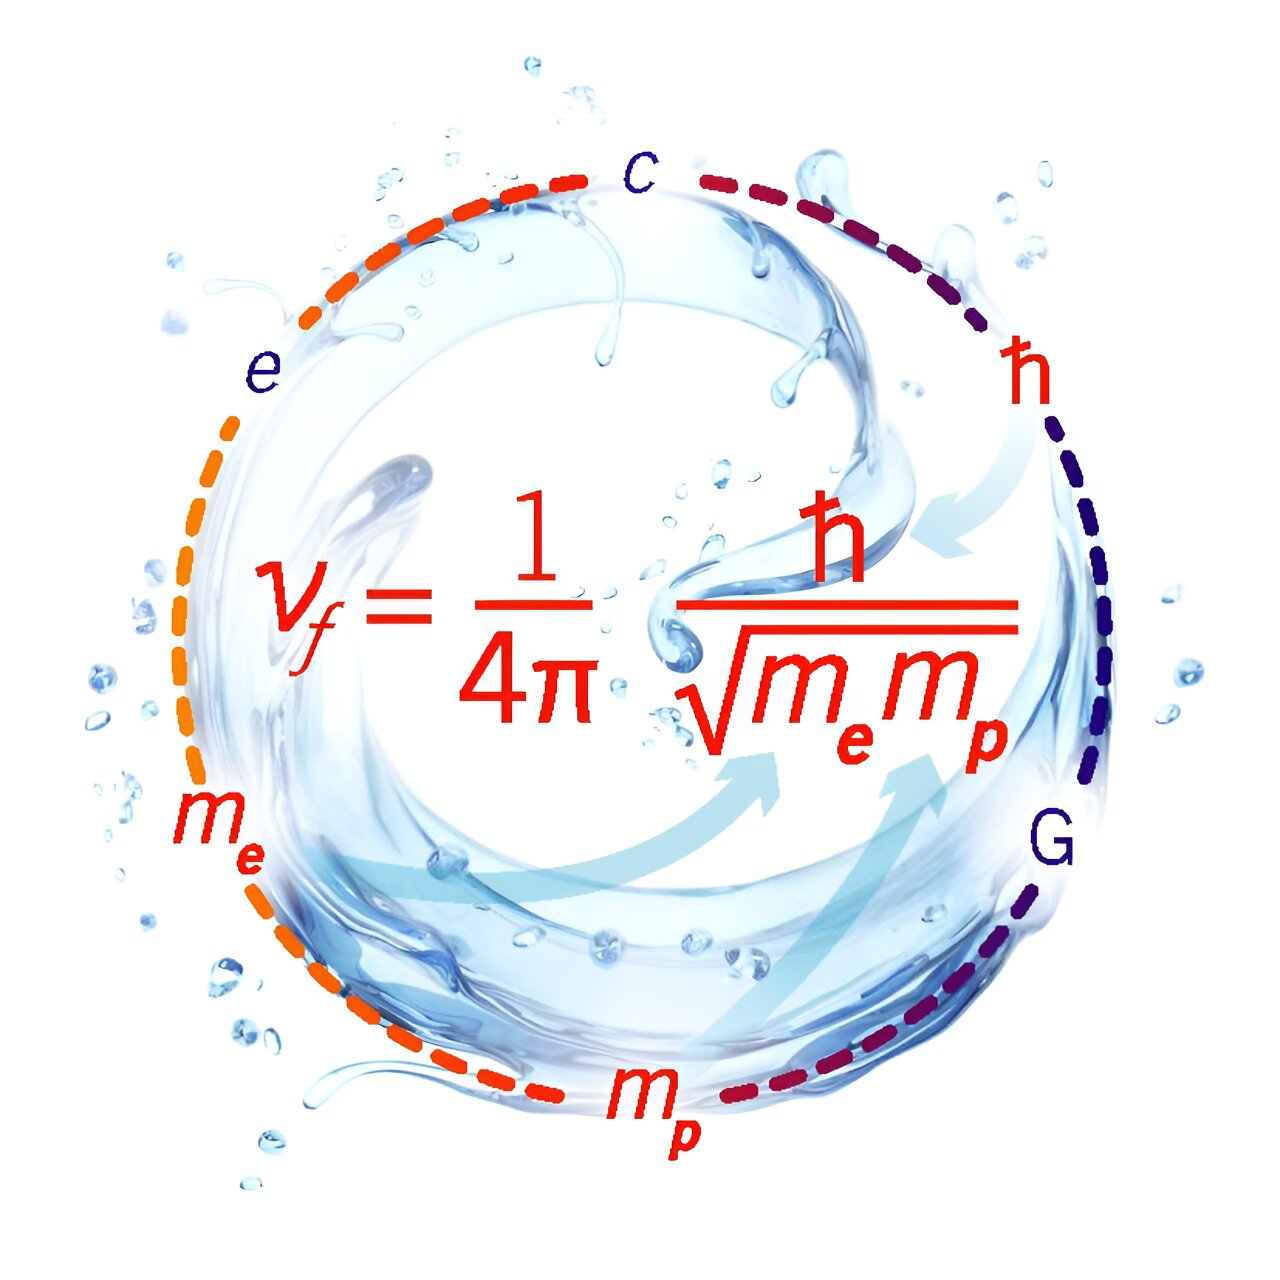 “Unlocking the Mysteries of Our Universe: Insights Revealed by a Simple Cup of Water”